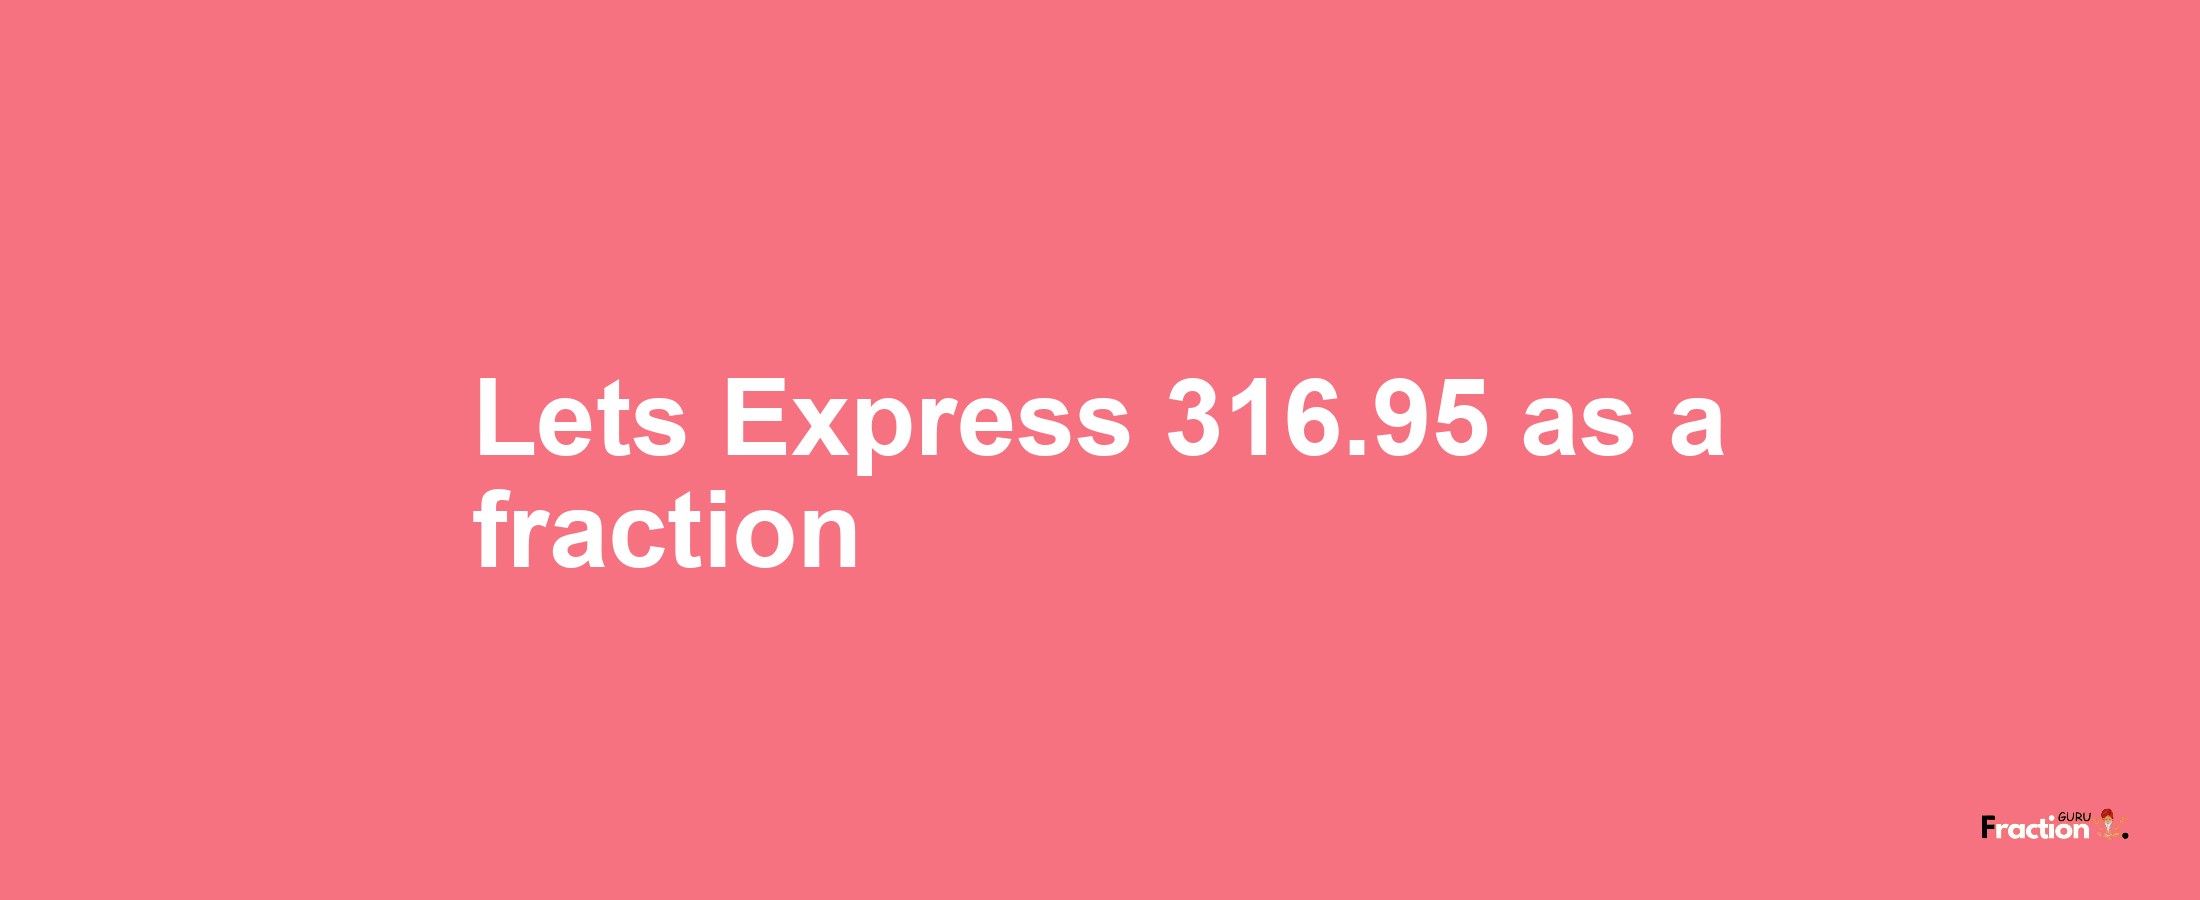 Lets Express 316.95 as afraction